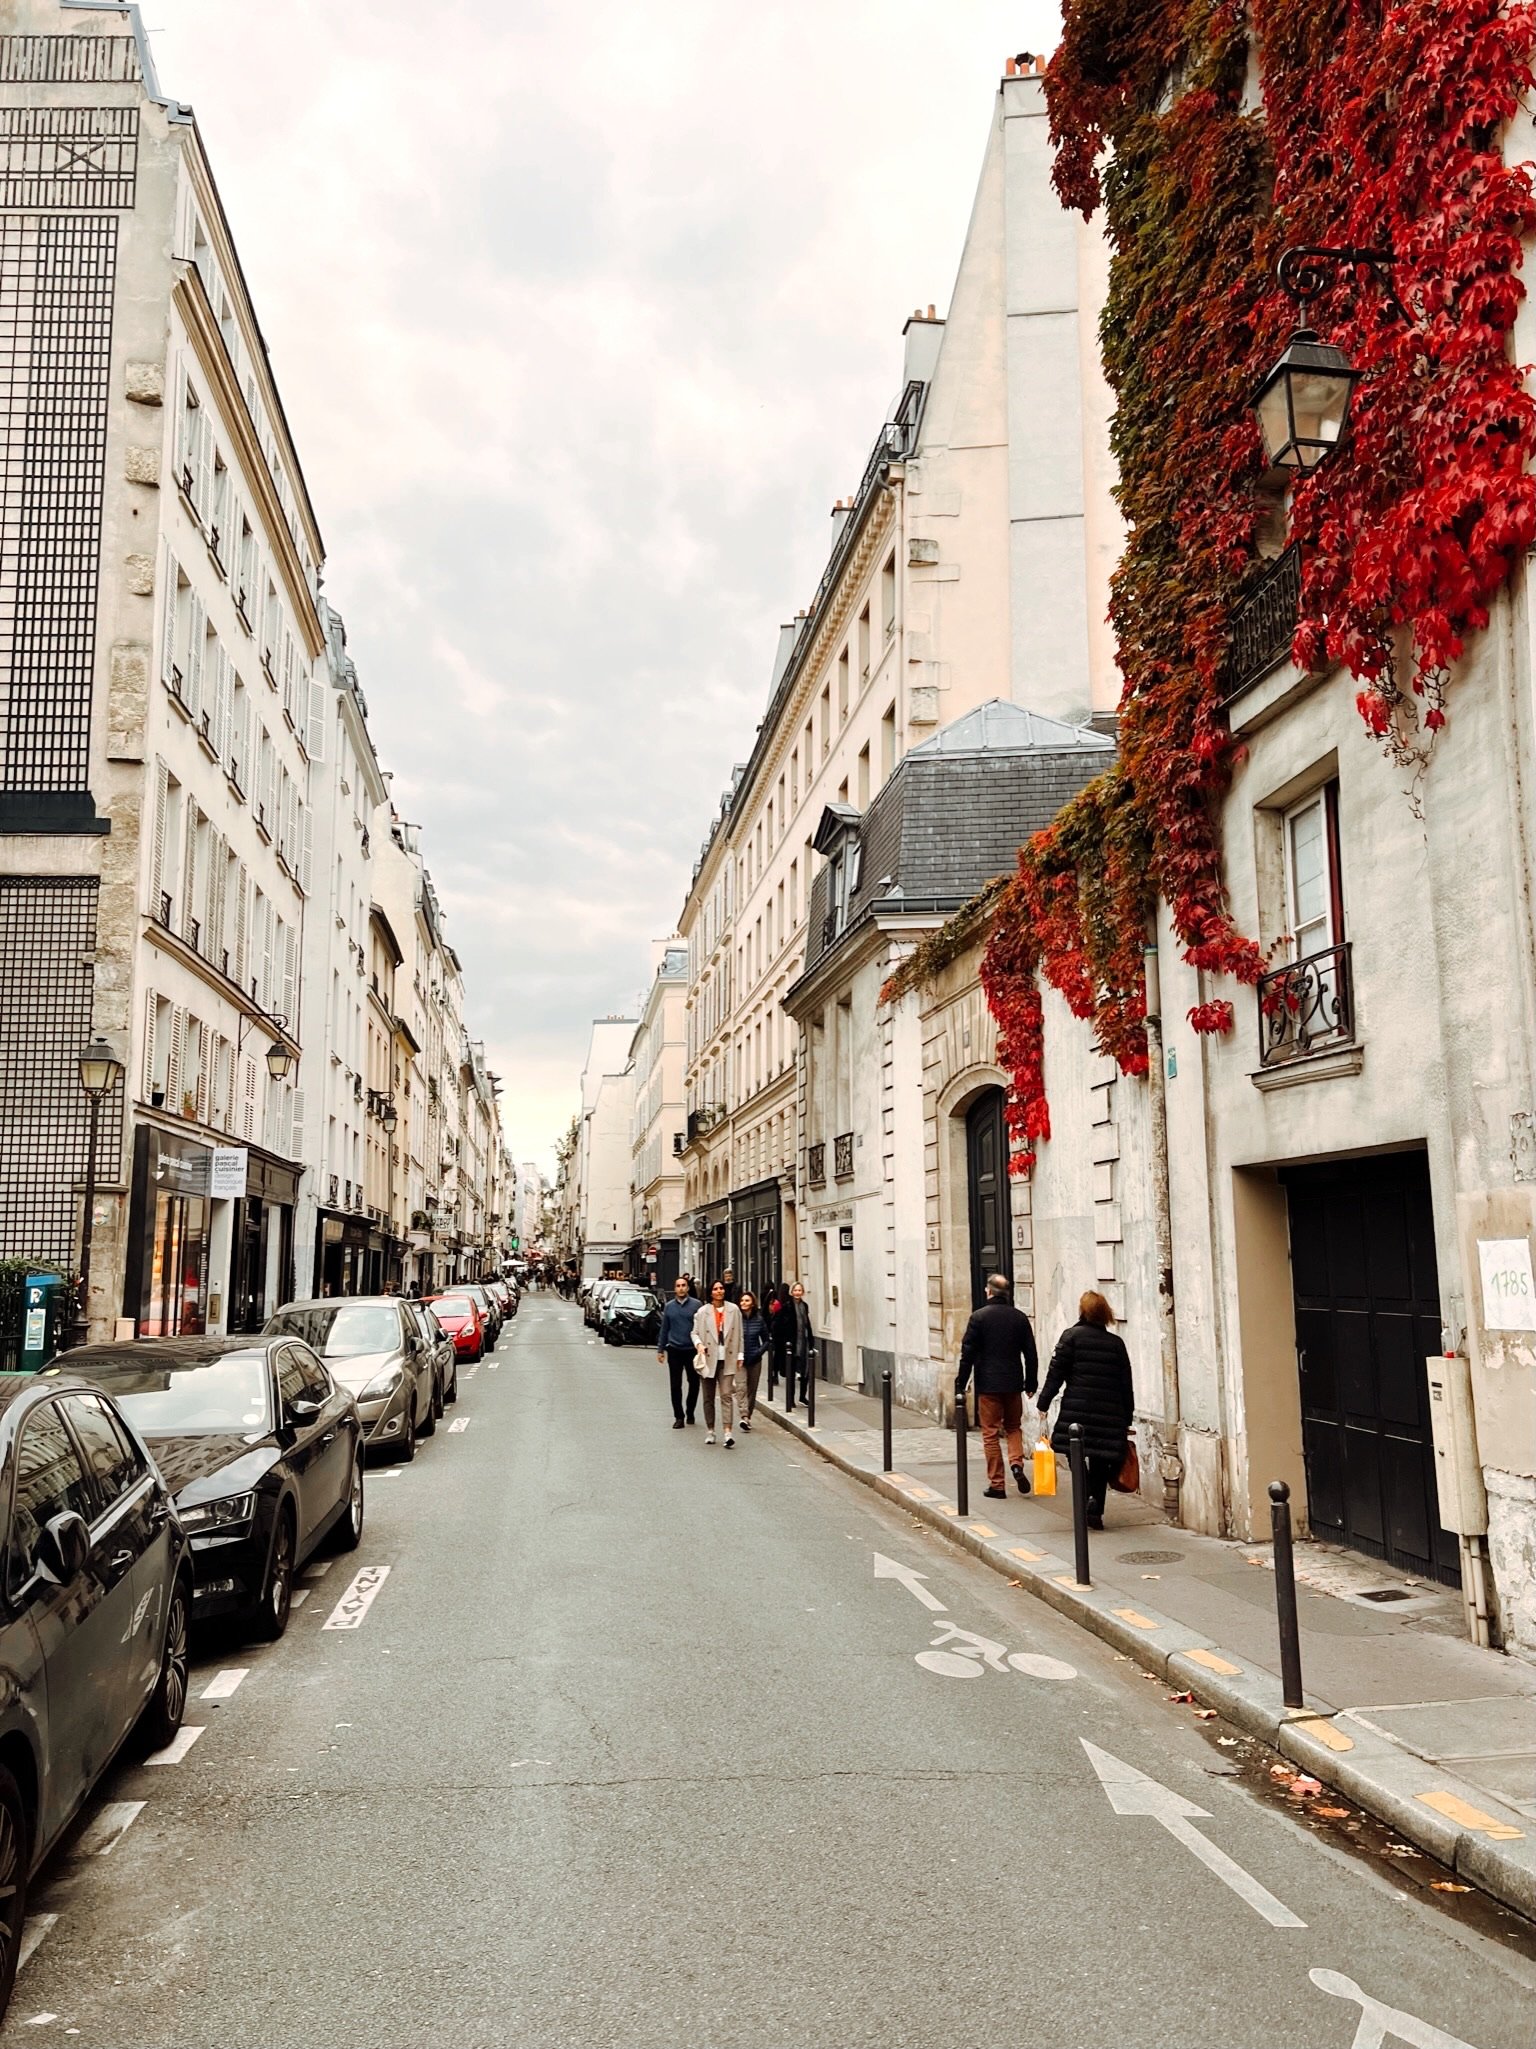 Walking Up the High End Street of Avenue Montaigne, Paris 